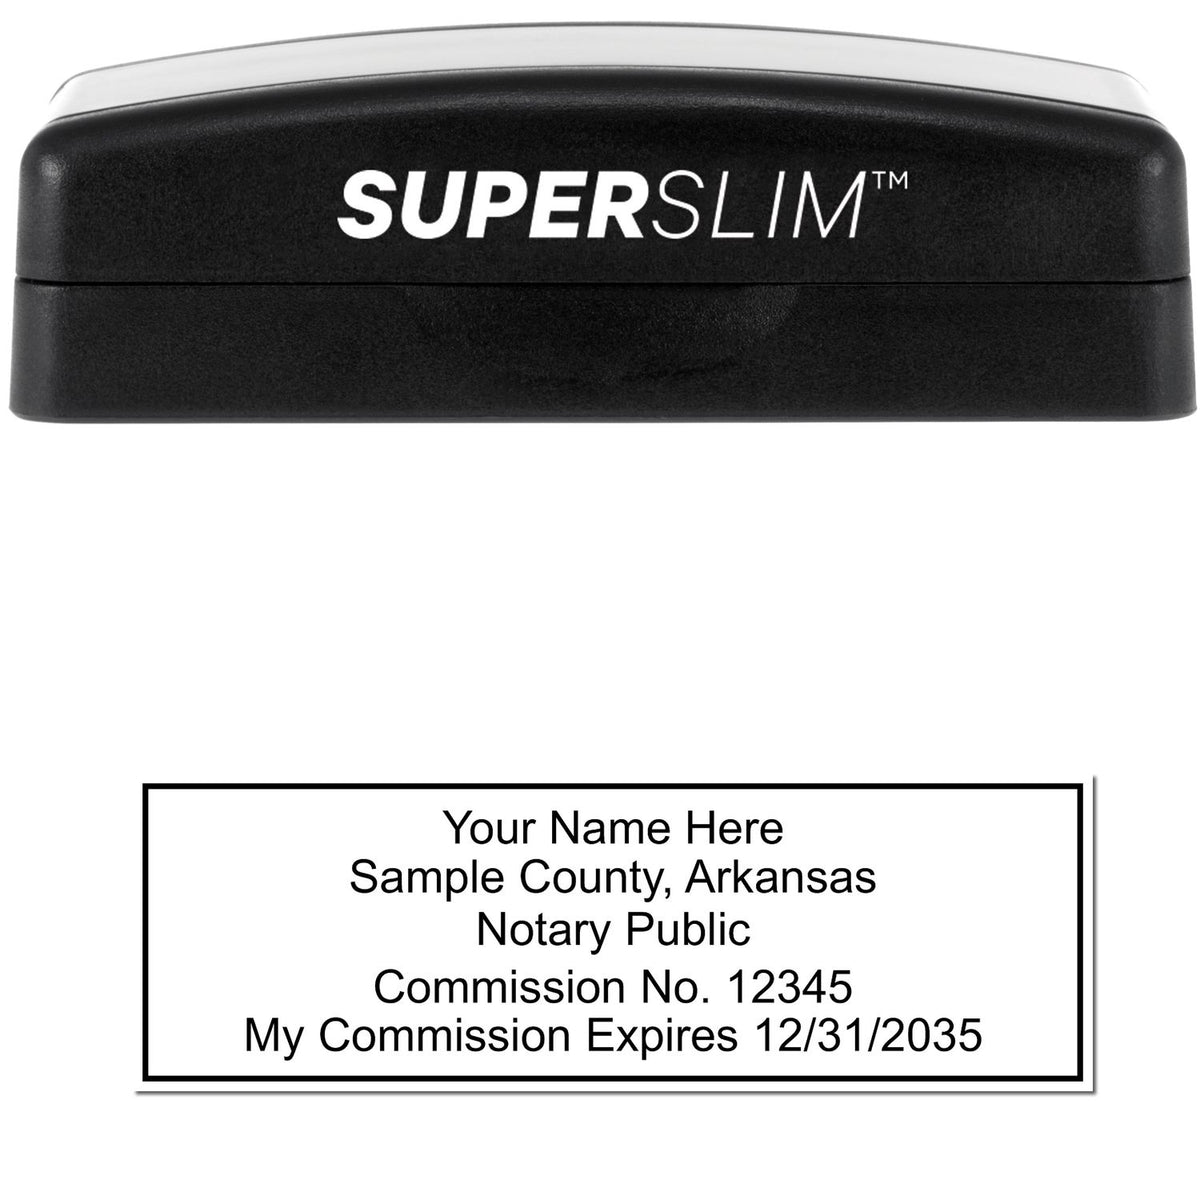 The main image for the Super Slim Arkansas Notary Public Stamp depicting a sample of the imprint and electronic files